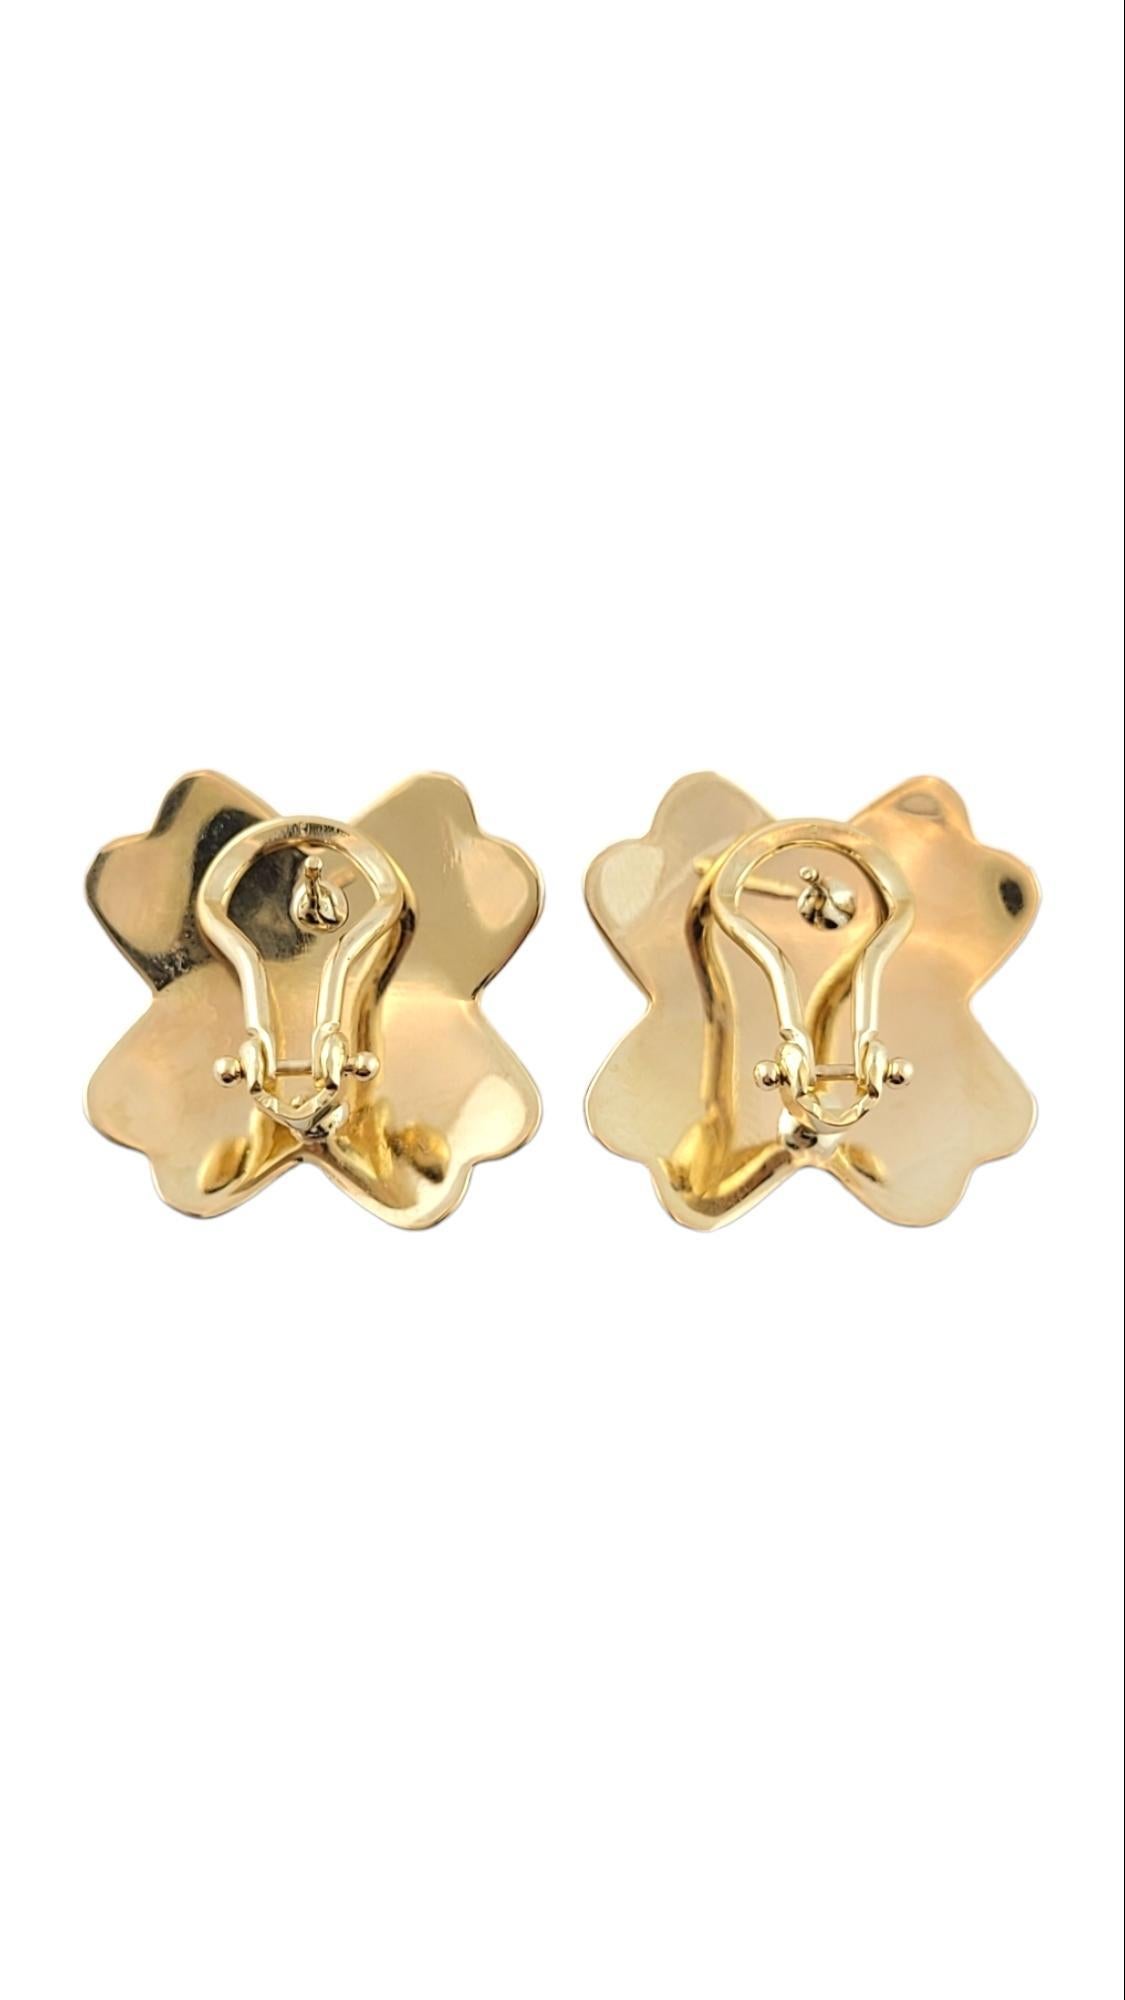 14K Yellow Gold X Stud Earrings w/ Lever Backs #15888 In Good Condition For Sale In Washington Depot, CT